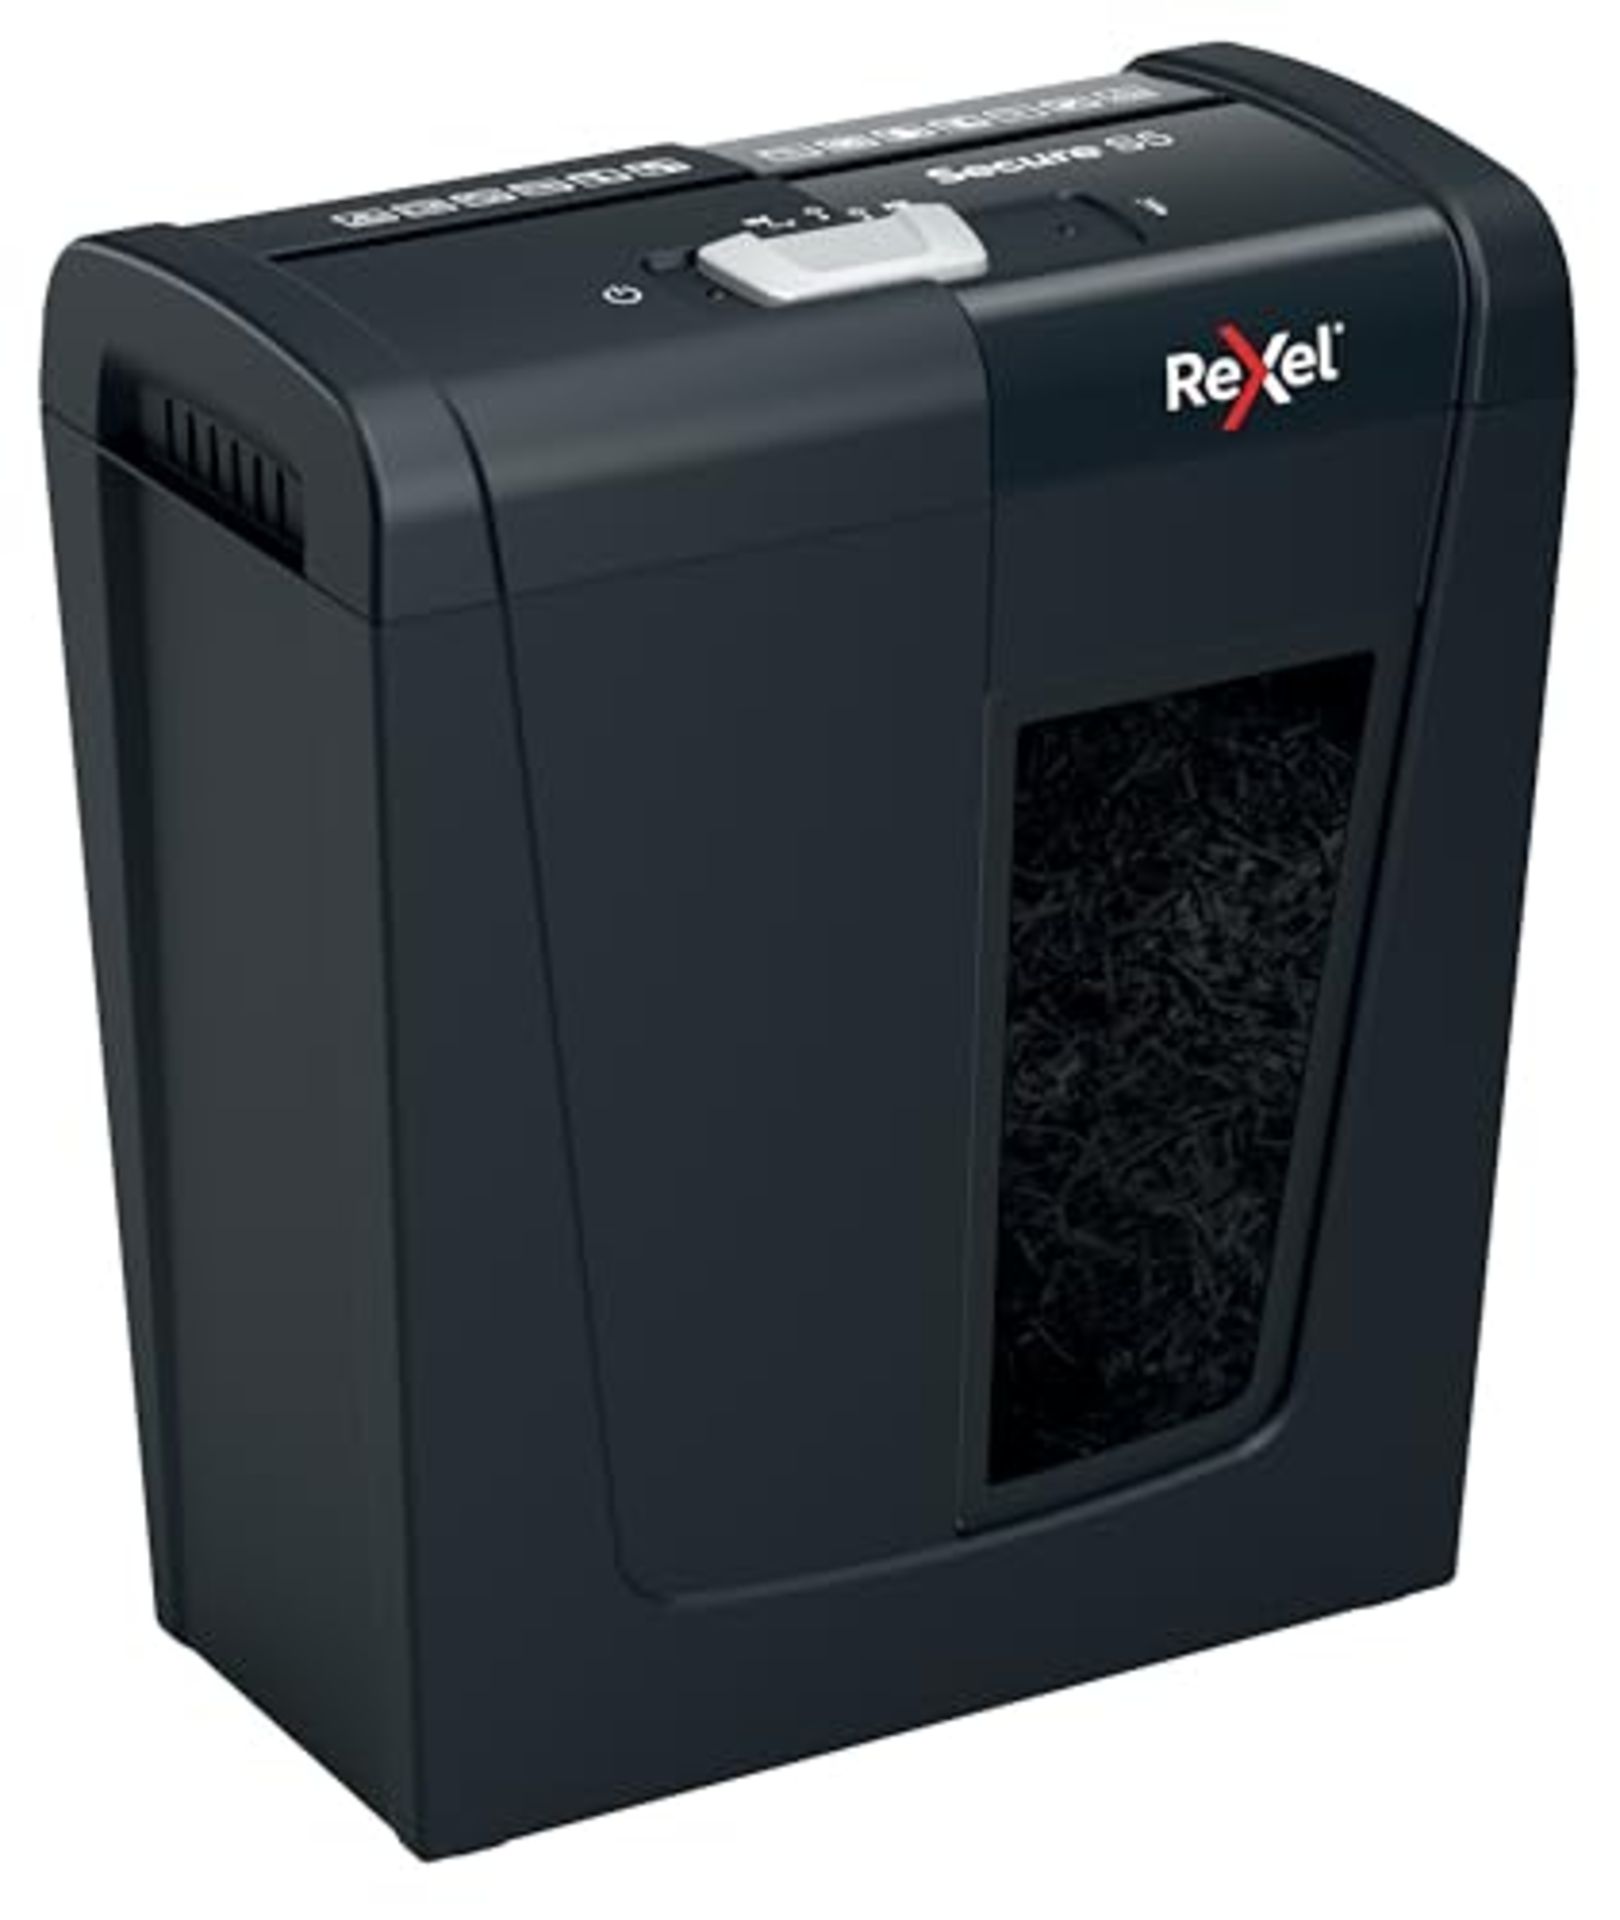 Rexel S5 Strip Cut Paper Shredder, Shreds 5 Sheets, P2 Security, Home/Home Office, 10